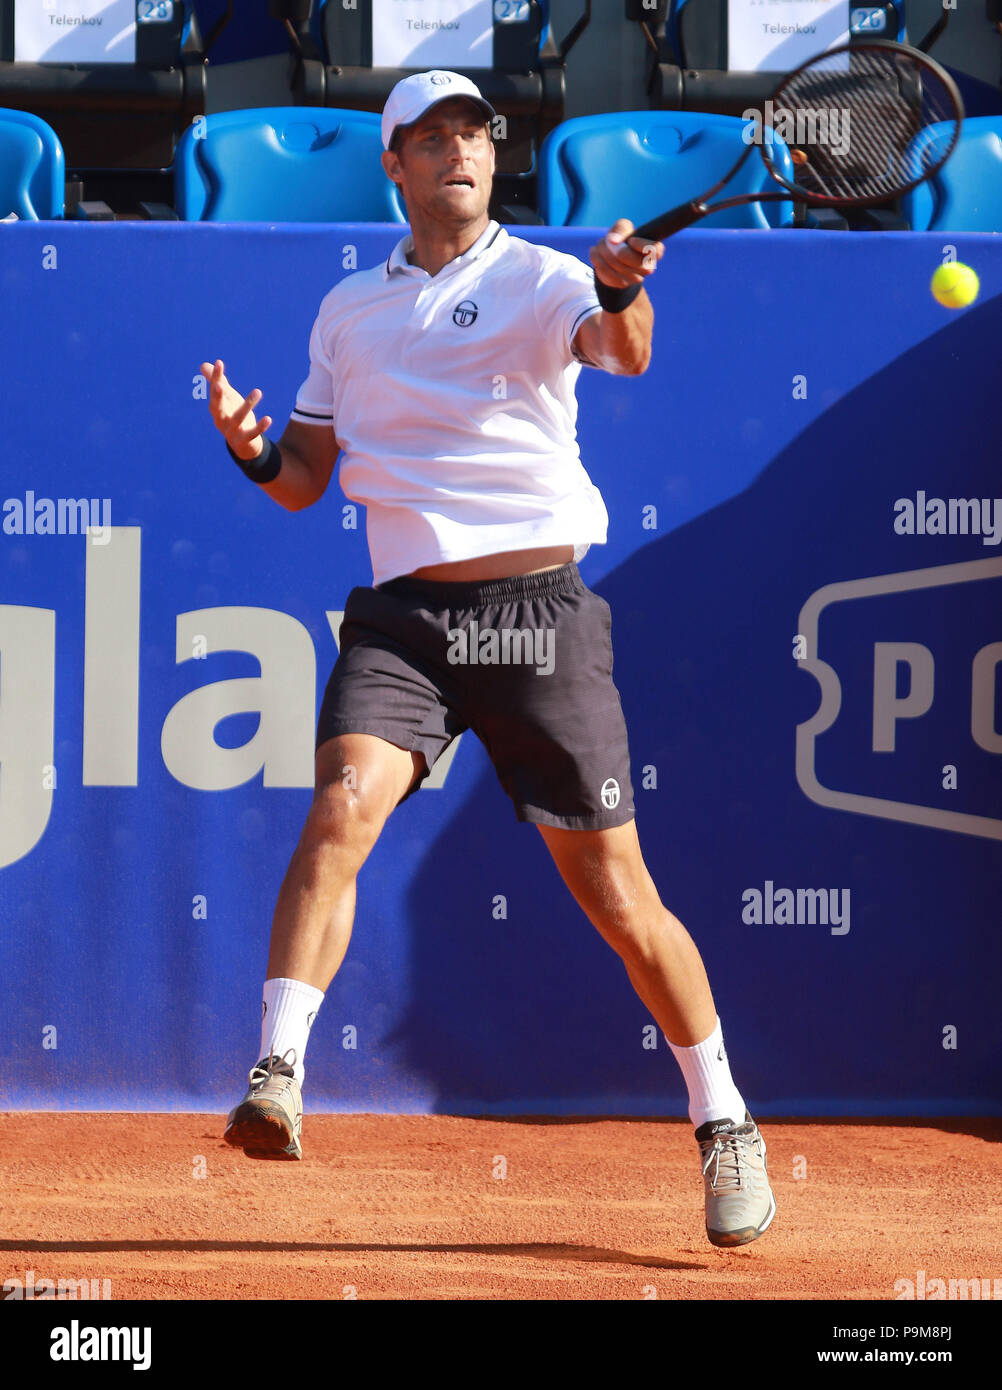 Umag, CROATIA, Umag: Martin Klizan of Slovakia hits a return to Robin Haase of Holland during the singles match Klizan v Haase at the ATP 29th Plava laguna Croatia Open Umag tournament at the at the Goran Ivanisevic ATP Stadium, on July 19, 2018 in Umag. Credit: Andrea Spinelli/Alamy Live News Stock Photo